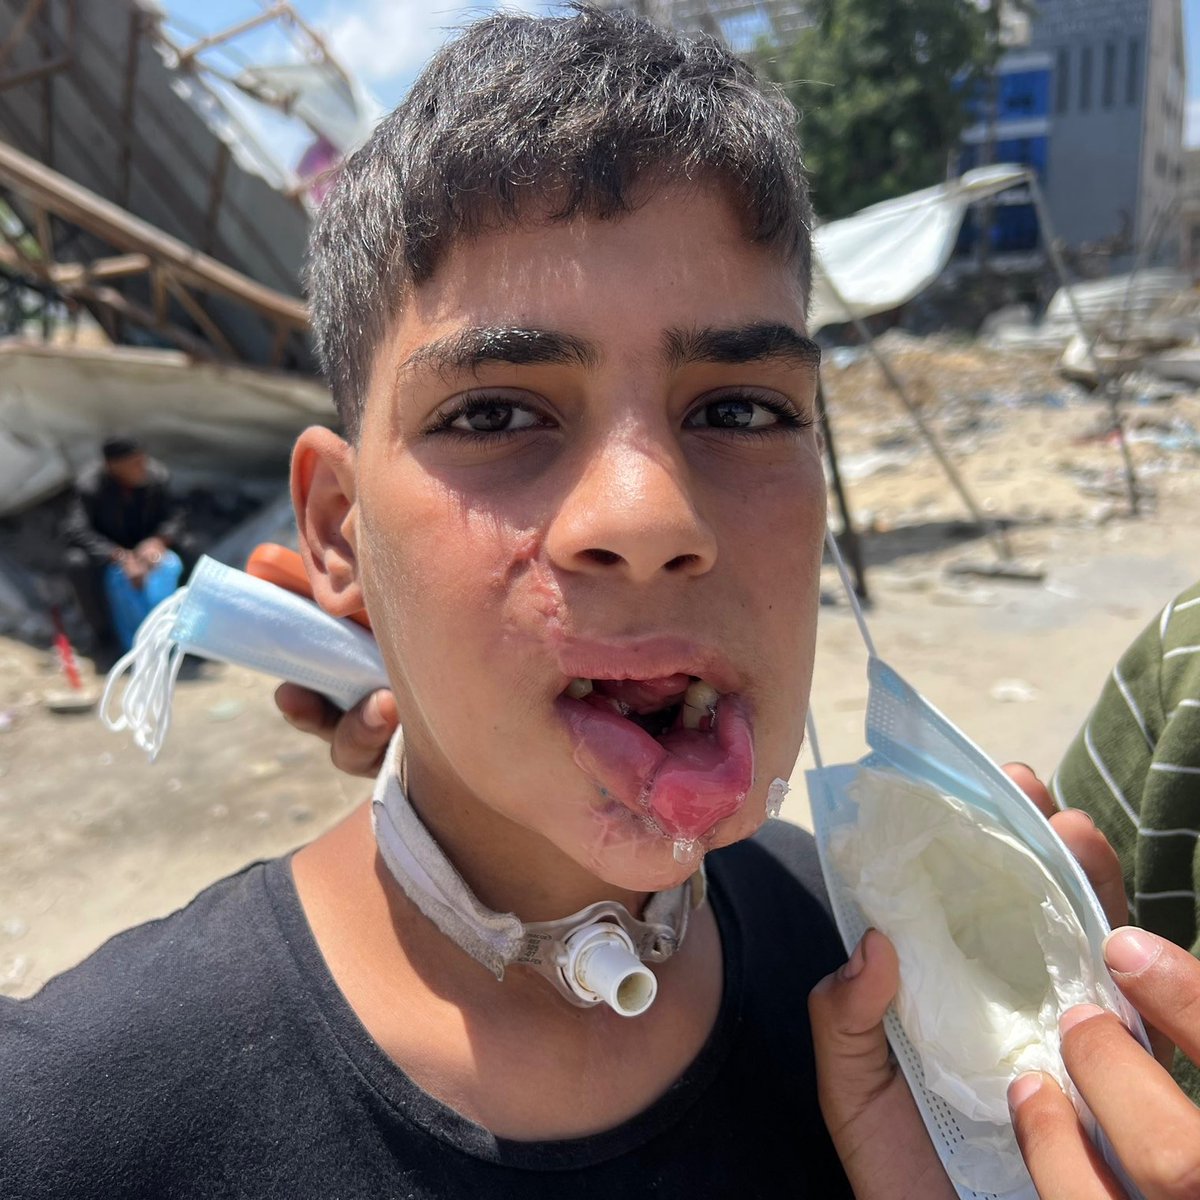 💔🇵🇸 An ISRAELI ATTACK left 13 year old Majd al Shaghnoubi wounded in his jaw and neck. He breathes from his neck and needs urgent medical treatment. NEVER FORGET...